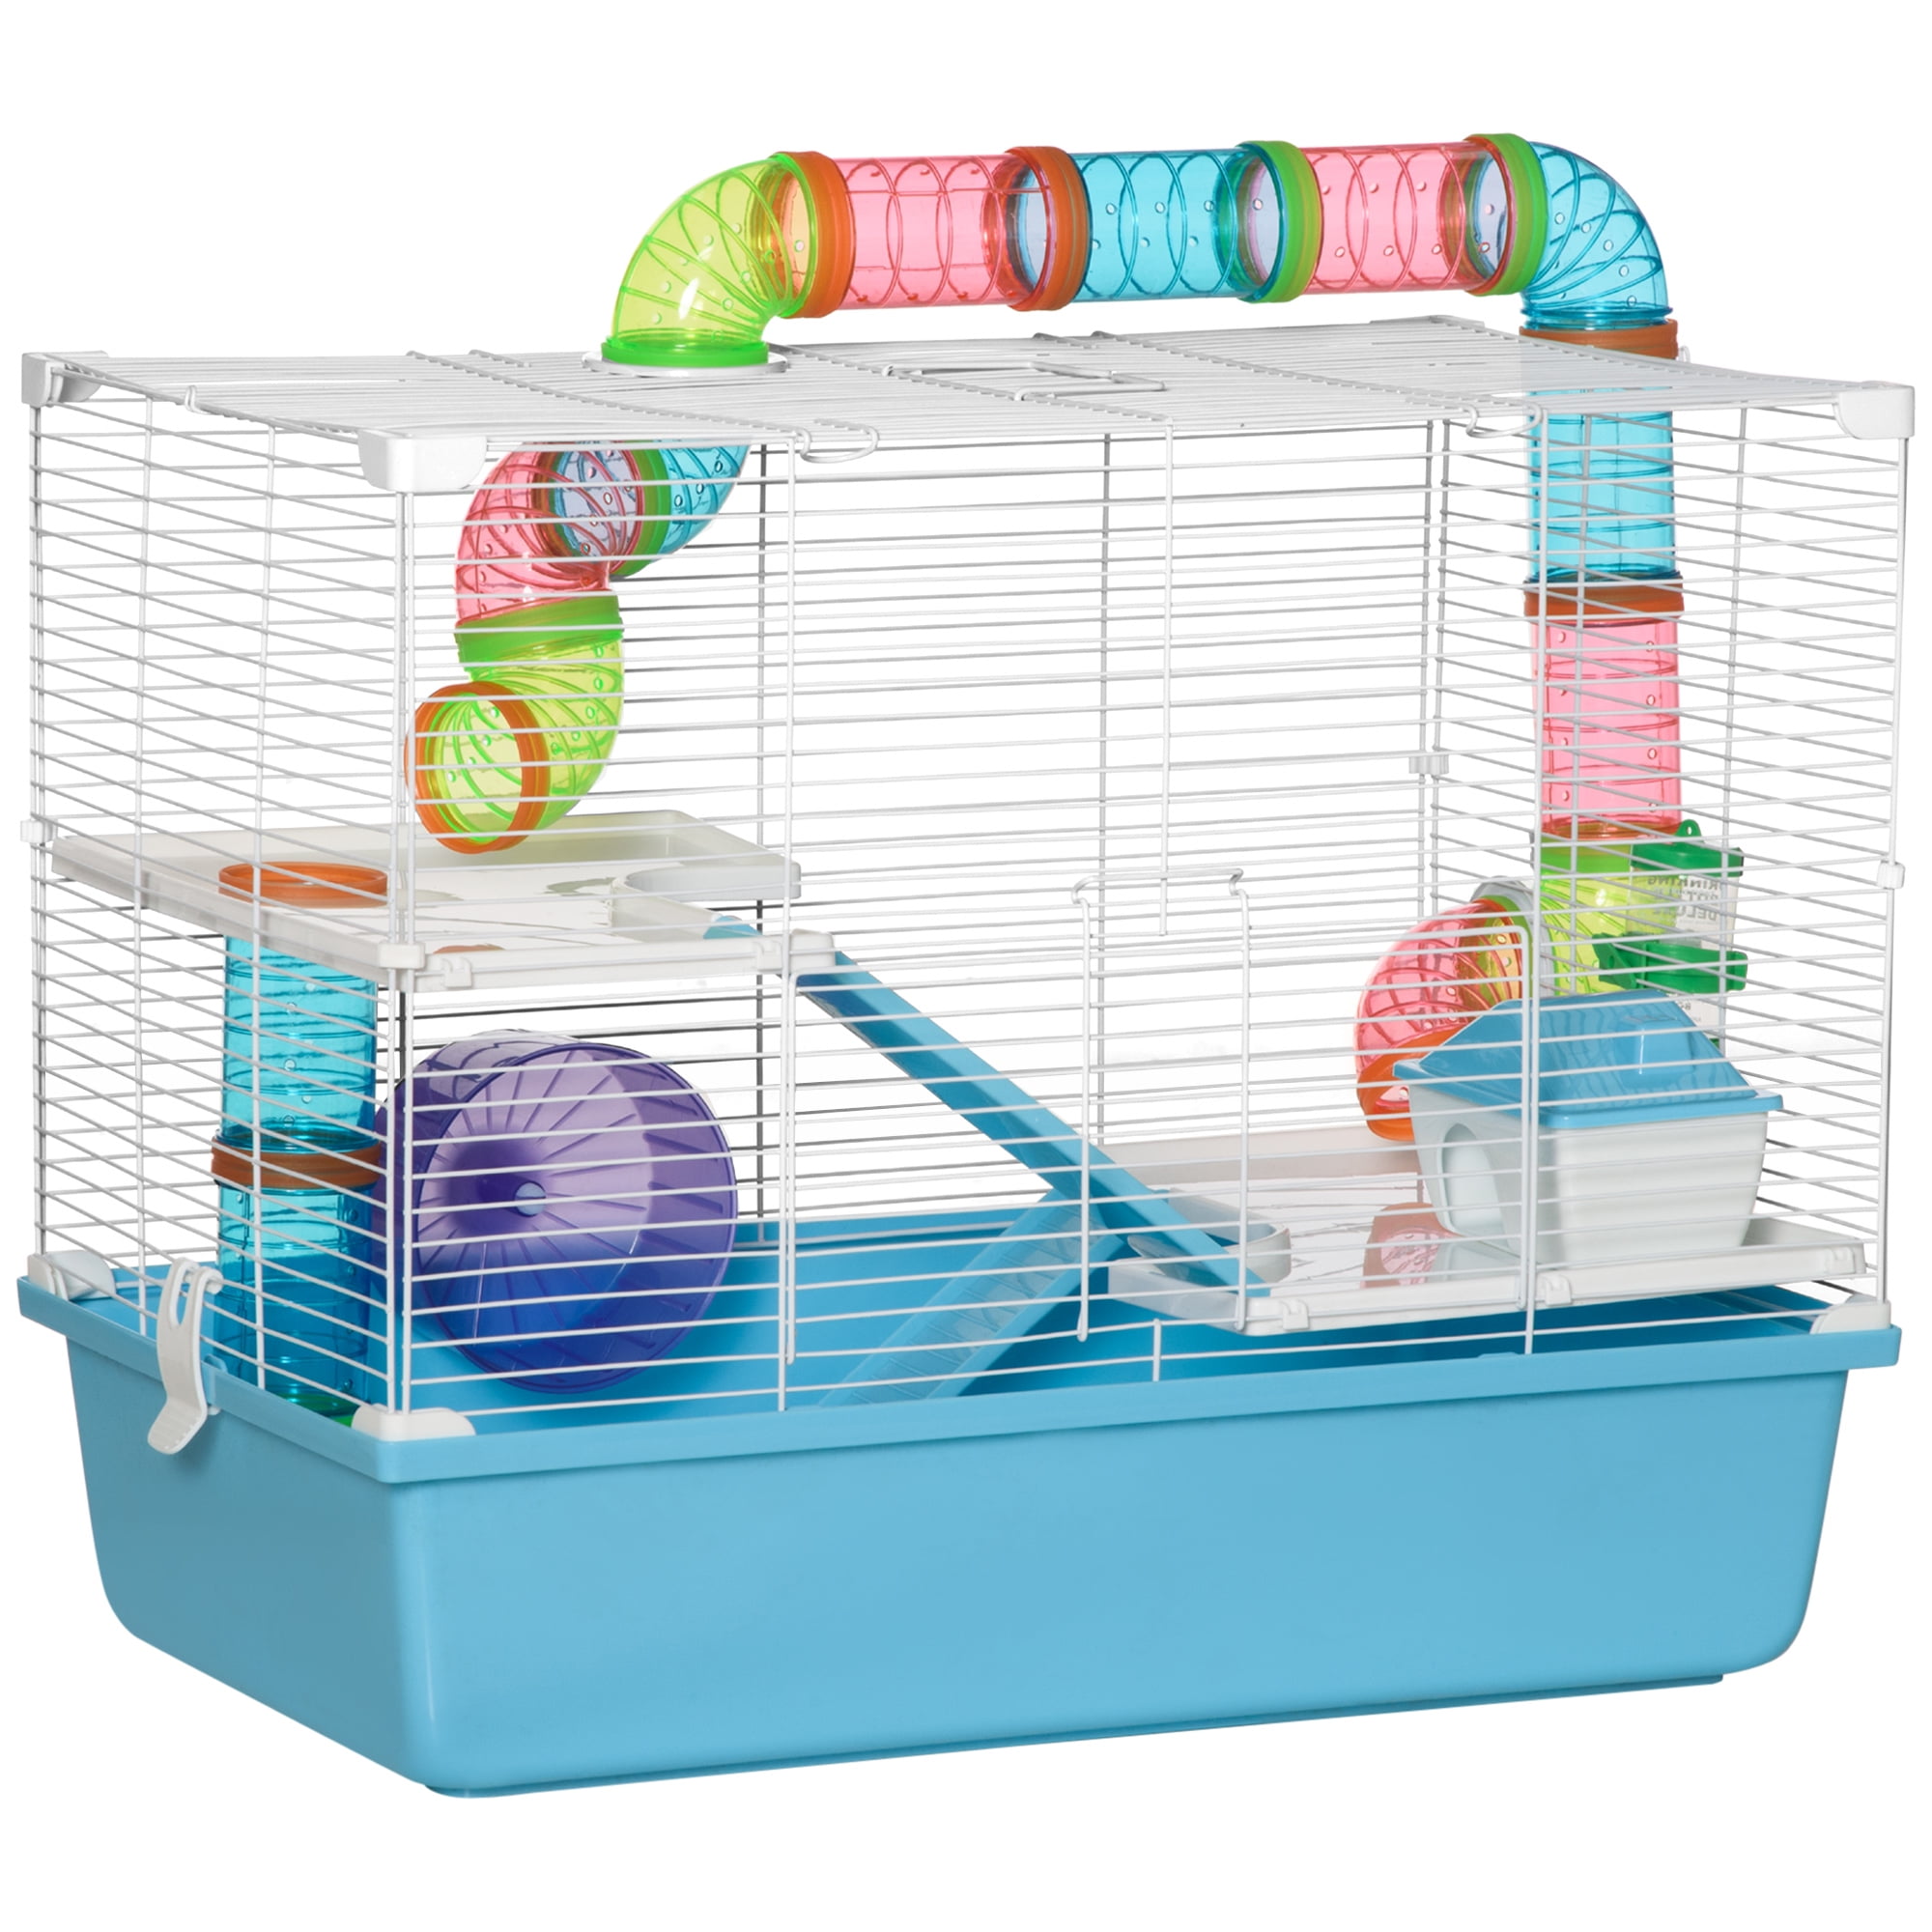 6. Plastic cages for hamsters can be a great way to teach kids about pet care